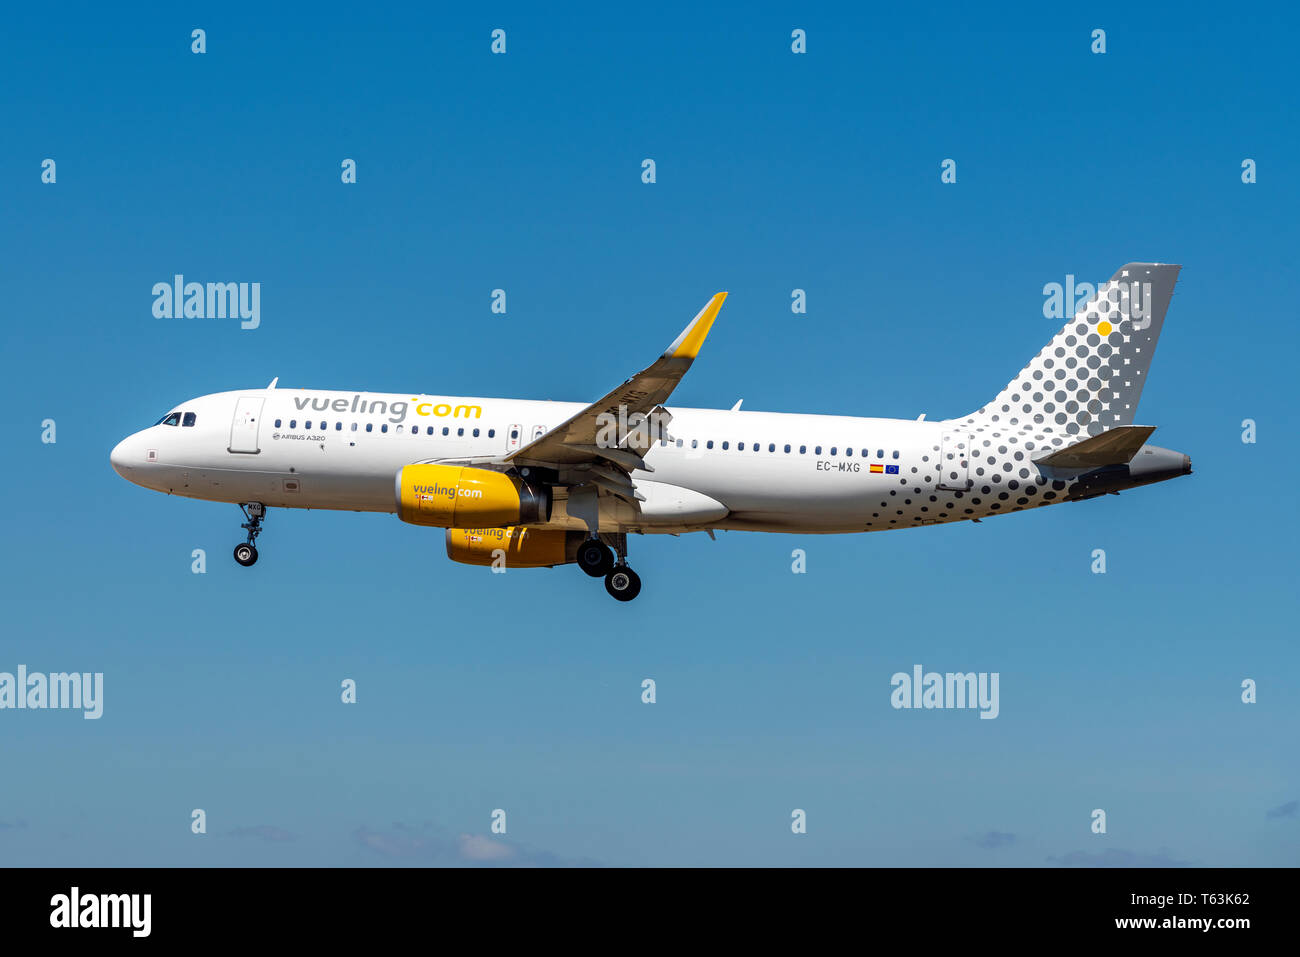 Vueling Airbus A320 with winglets on approach, Barcelona El Prat airport, Catalonia, Spain Stock Photo